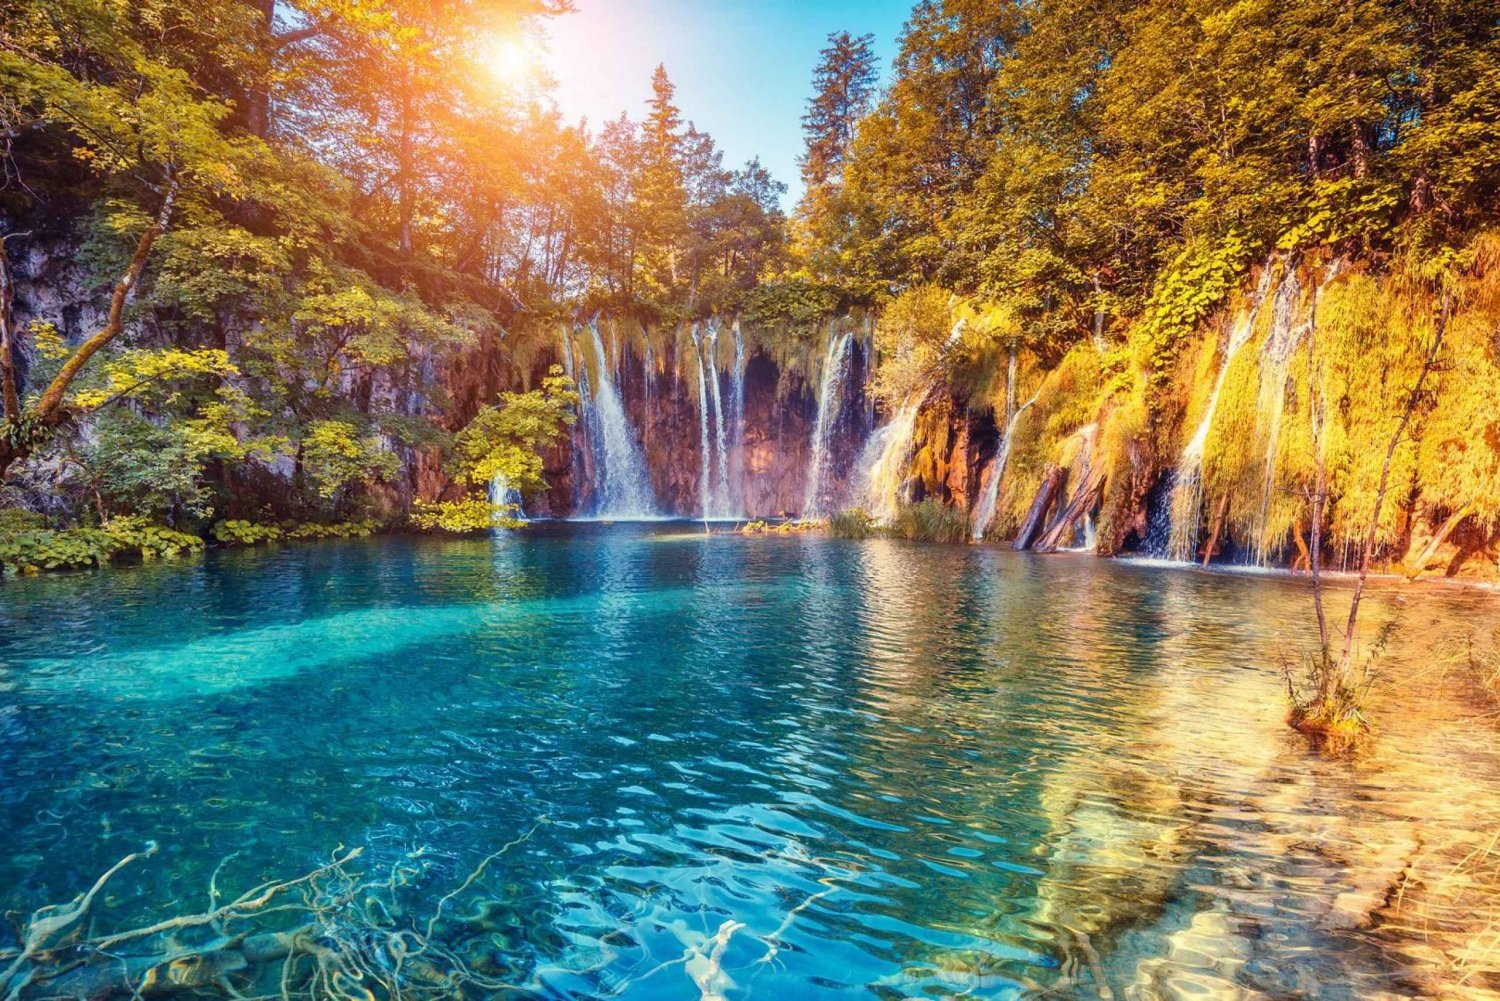 Split: Transfer to Zagreb with Plitvice Lakes Entry Tickets